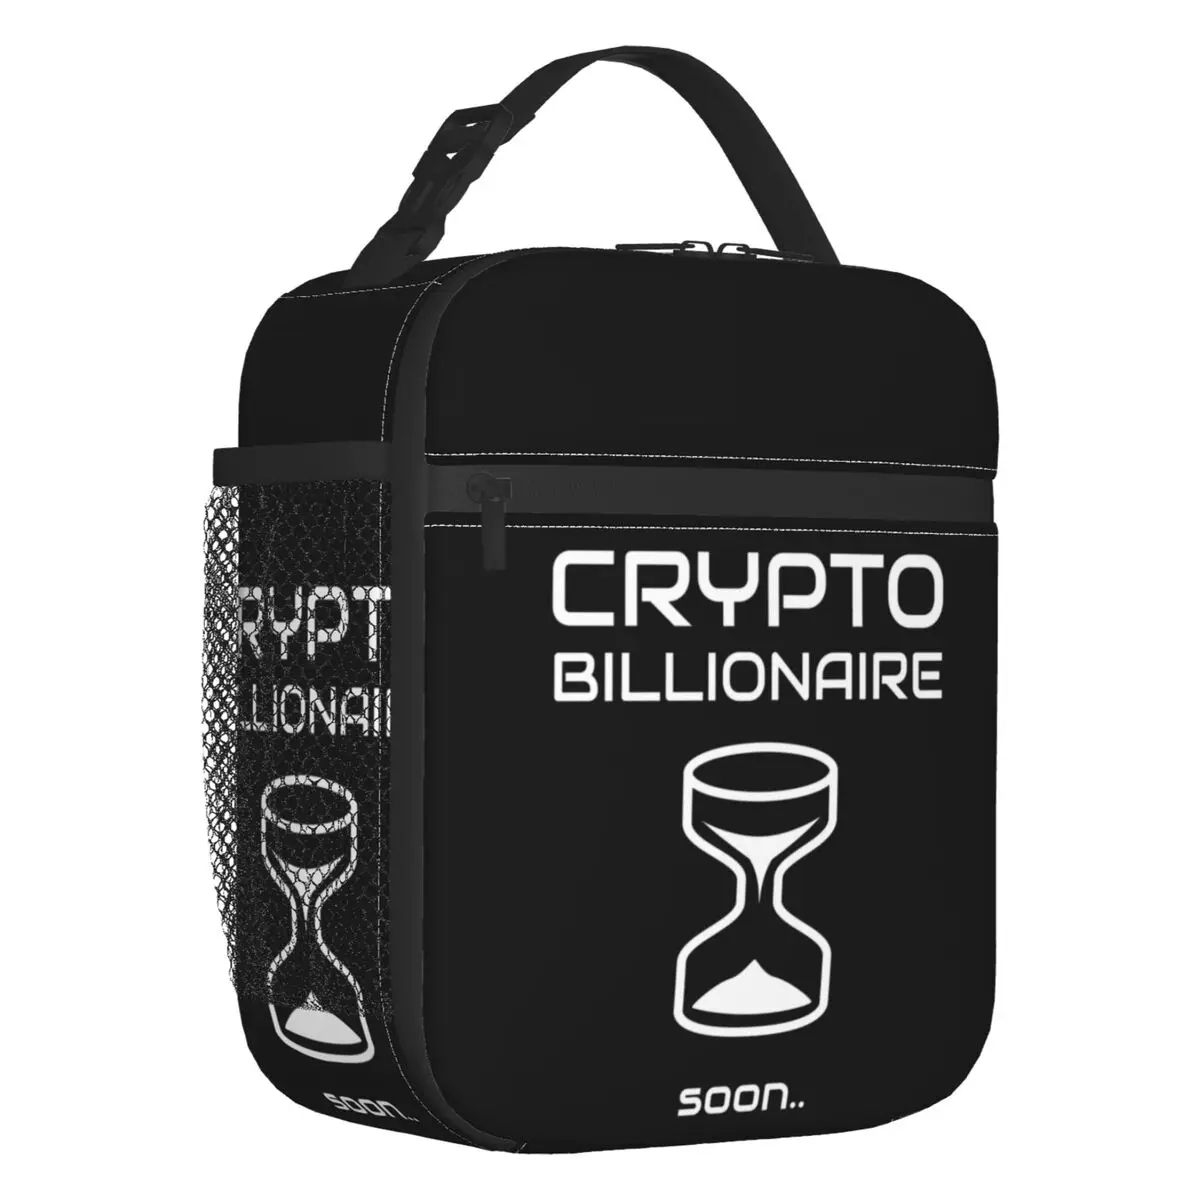 

Crypto Billionaire Soon Insulated Lunch Bags for Women Bitcoin Digital Currency Portable Cooler Thermal Food Lunch Box School